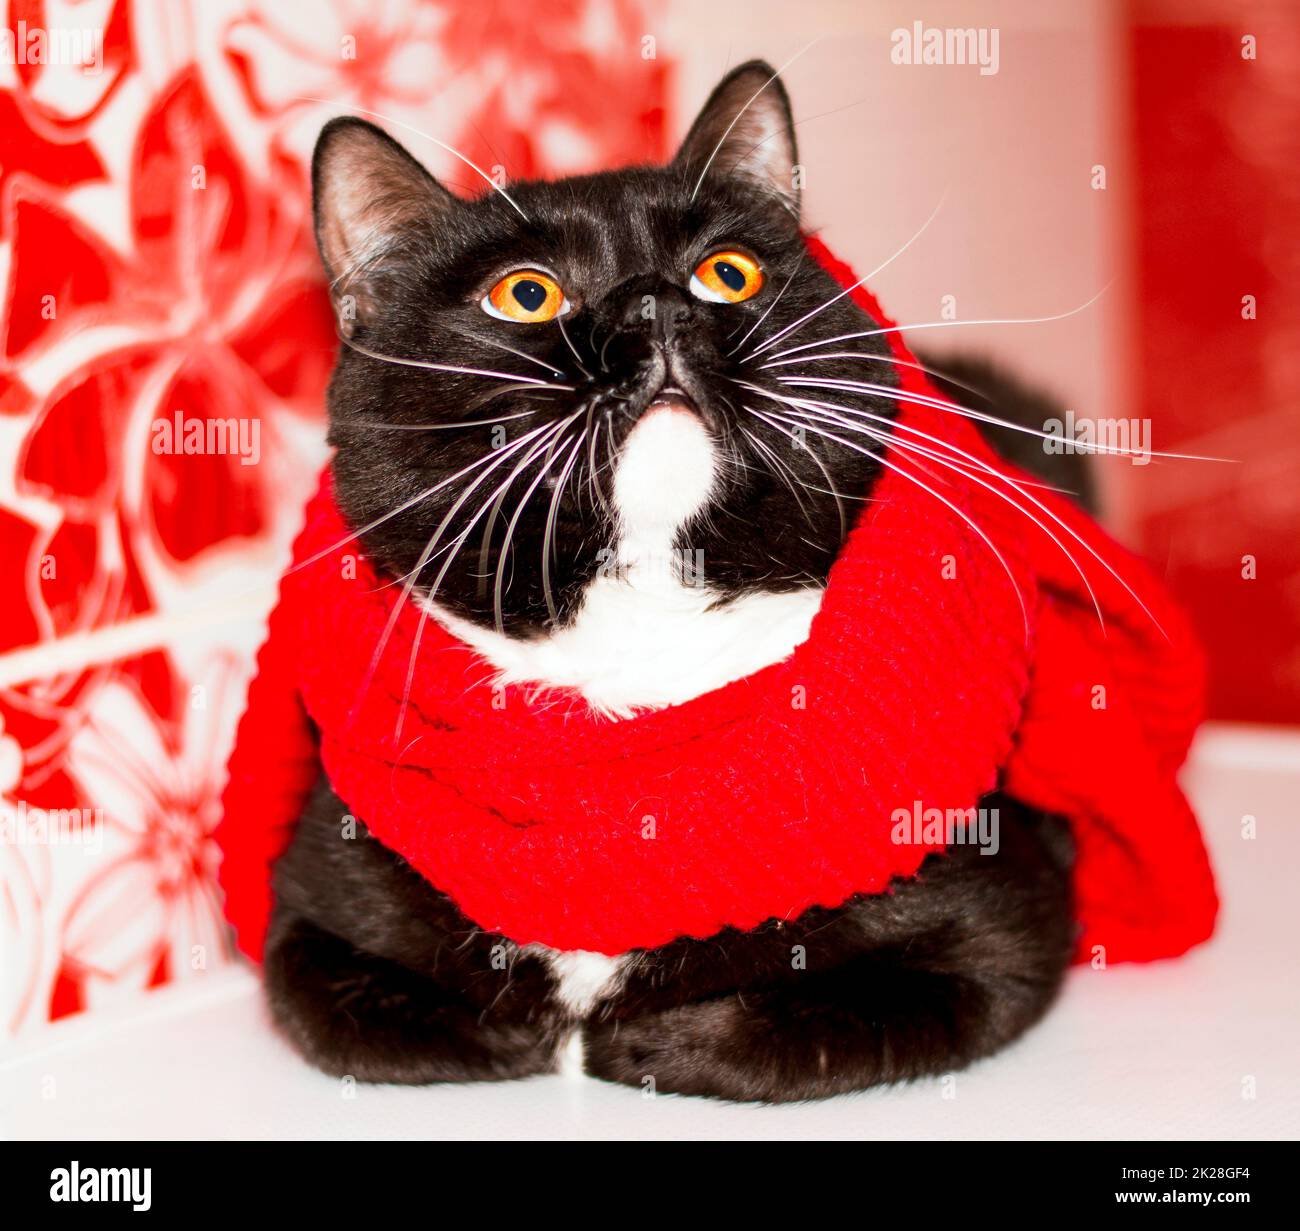 Beautiful Scottish bicolor cat close-up in a red scarf Stock Photo